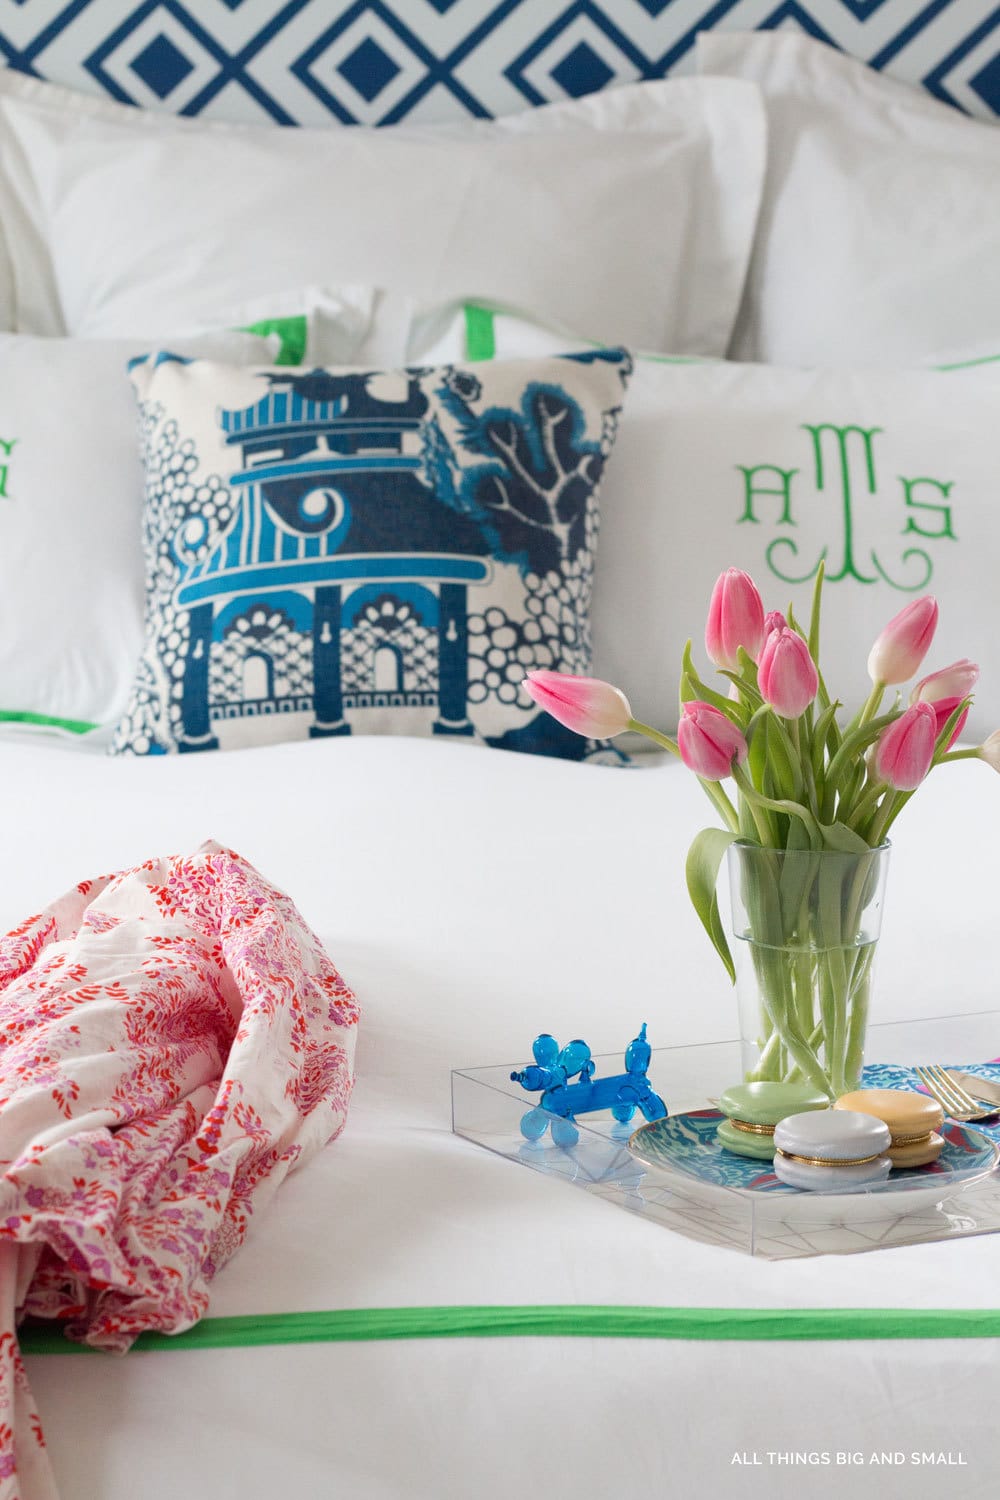 The Best Sources for monogrammed bedding and duvet covers from ALL THINGS BIG AND SMALL